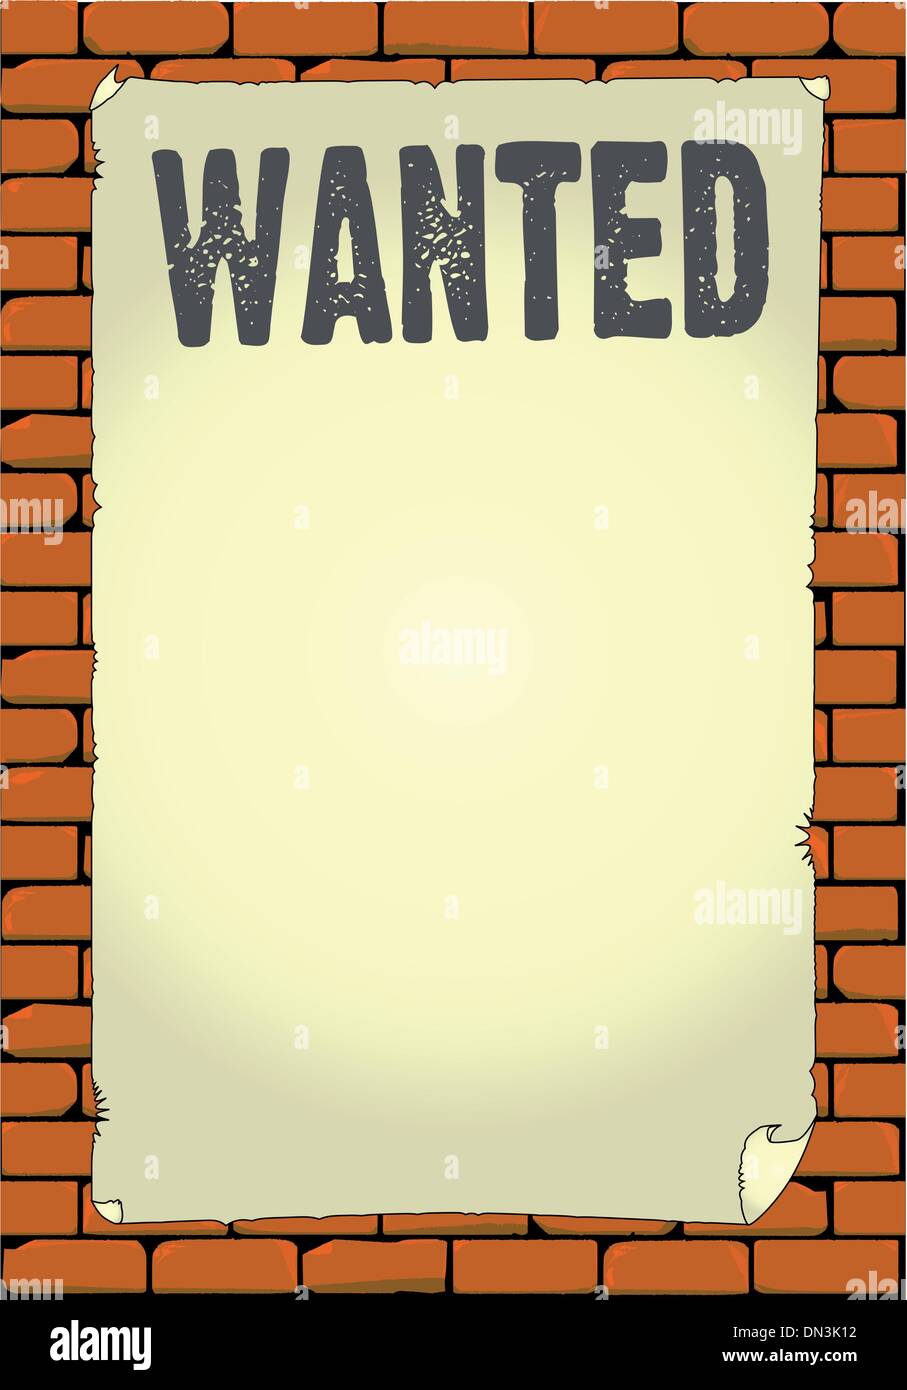 Wanted Poster Stock Vector